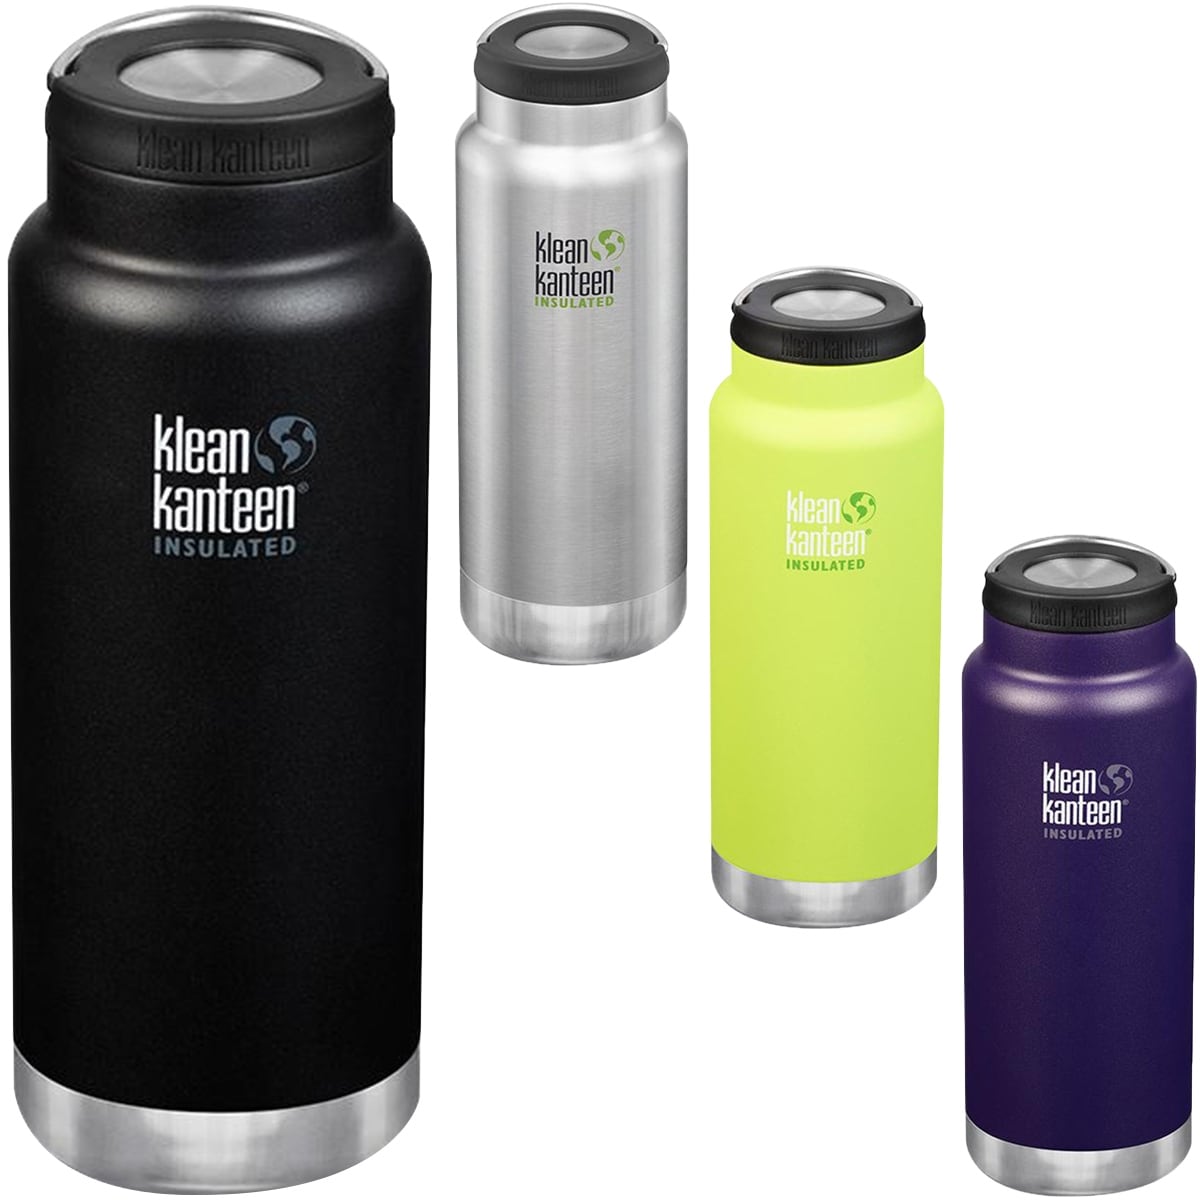 Shop For Klean Kanteen 32 Oz Tkwide Stainless Steel Bottle With Wide Loop Cap Get Free Delivery On Everything At Overstock Your Online Kitchen Dining Store Get 5 In Rewards With Club O